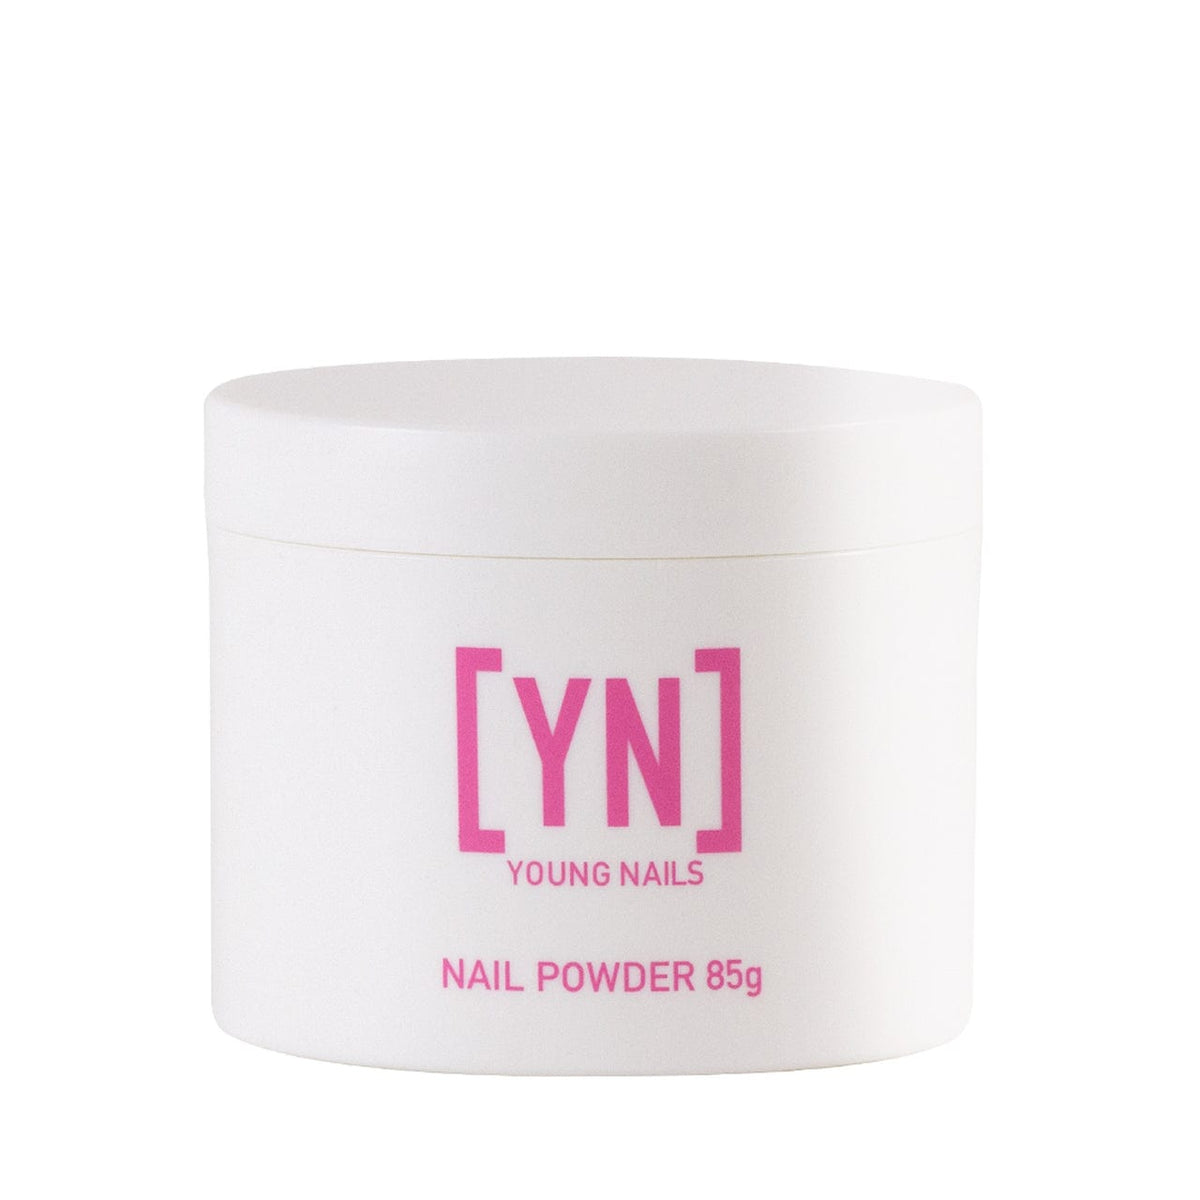 85g Core White Powder Nails - Young Nails - Luxe Pacifique